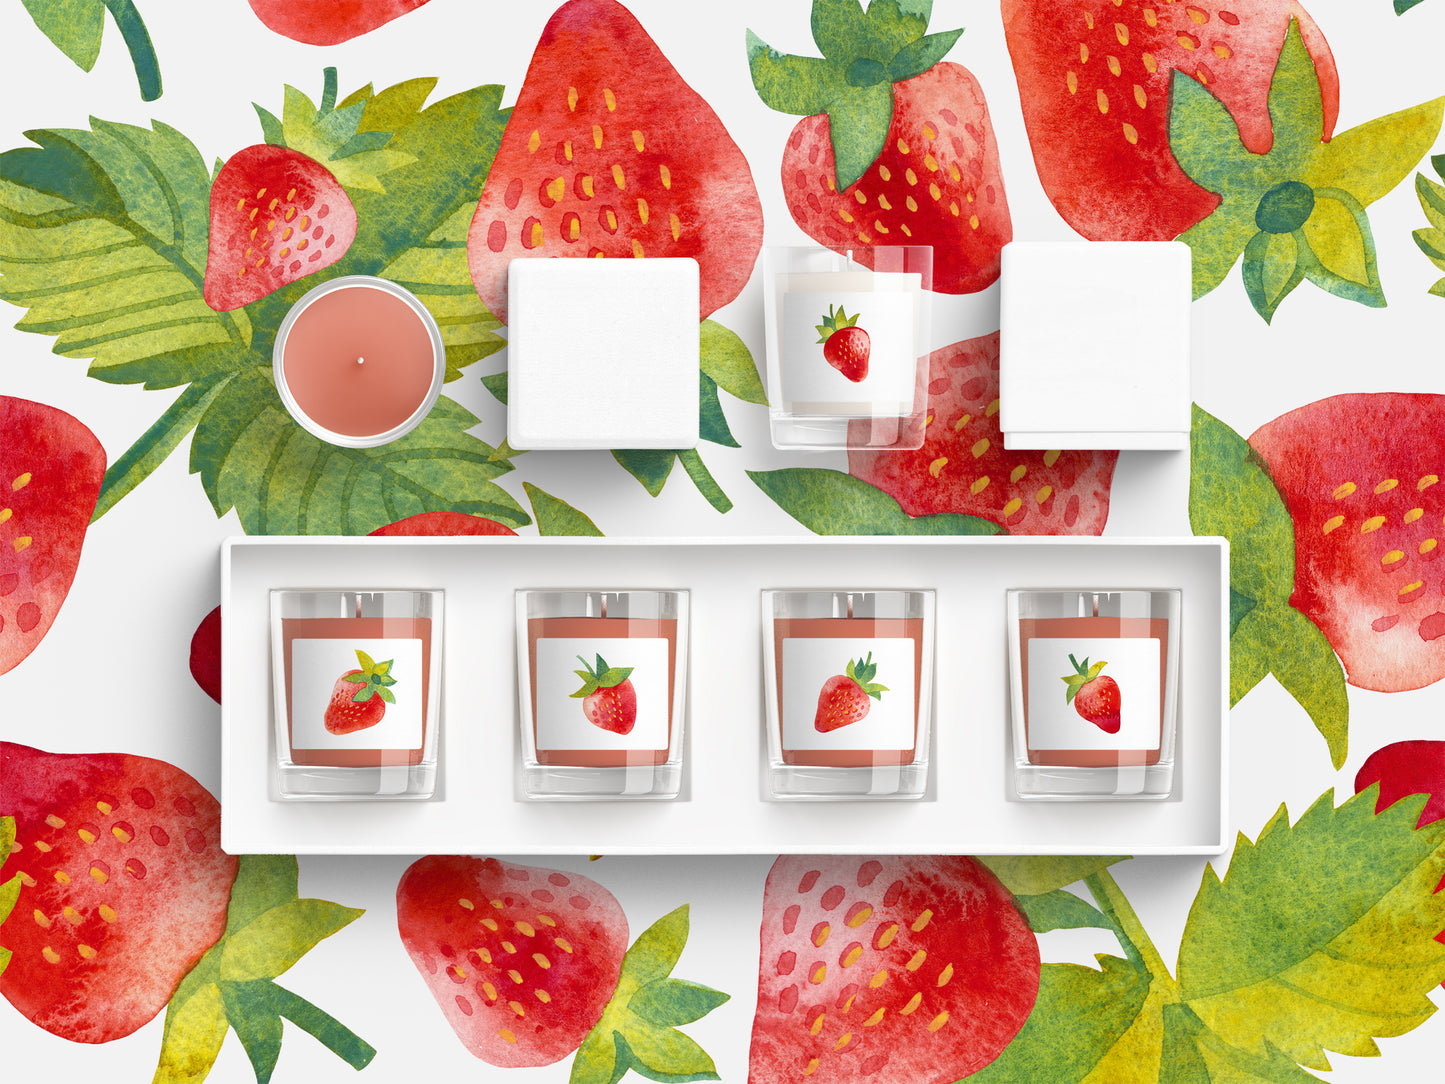 WATERCOLOR STRAWBERRY Graphic Collection